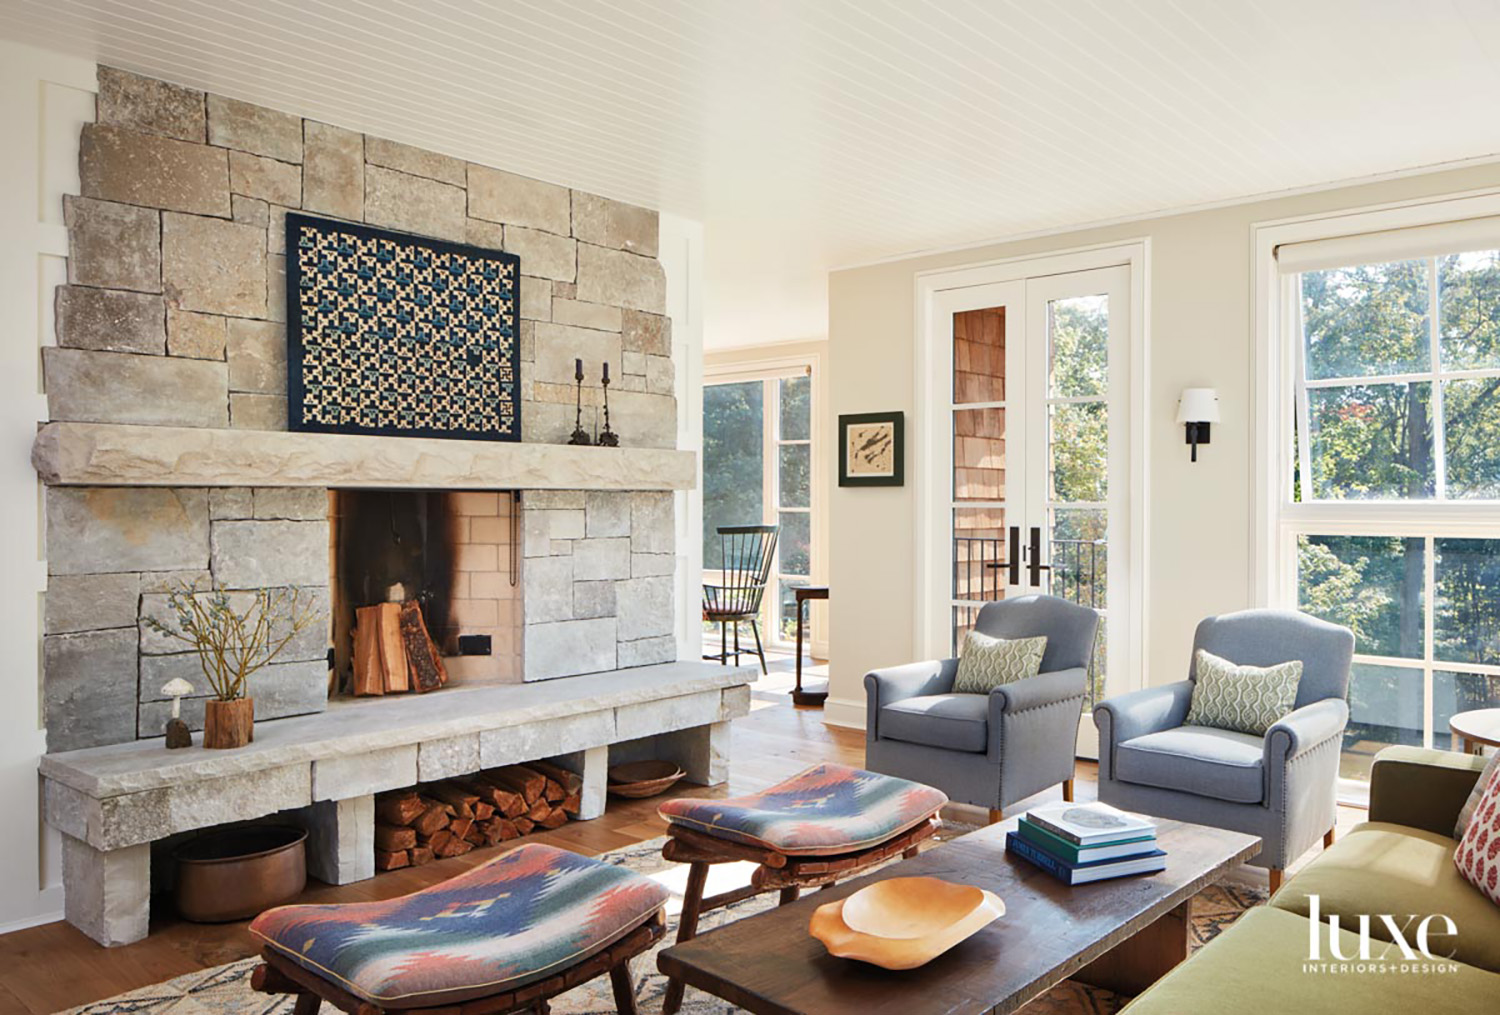 A living room with a large stone fireplace, two blue armchairs, a green sofa and two stools